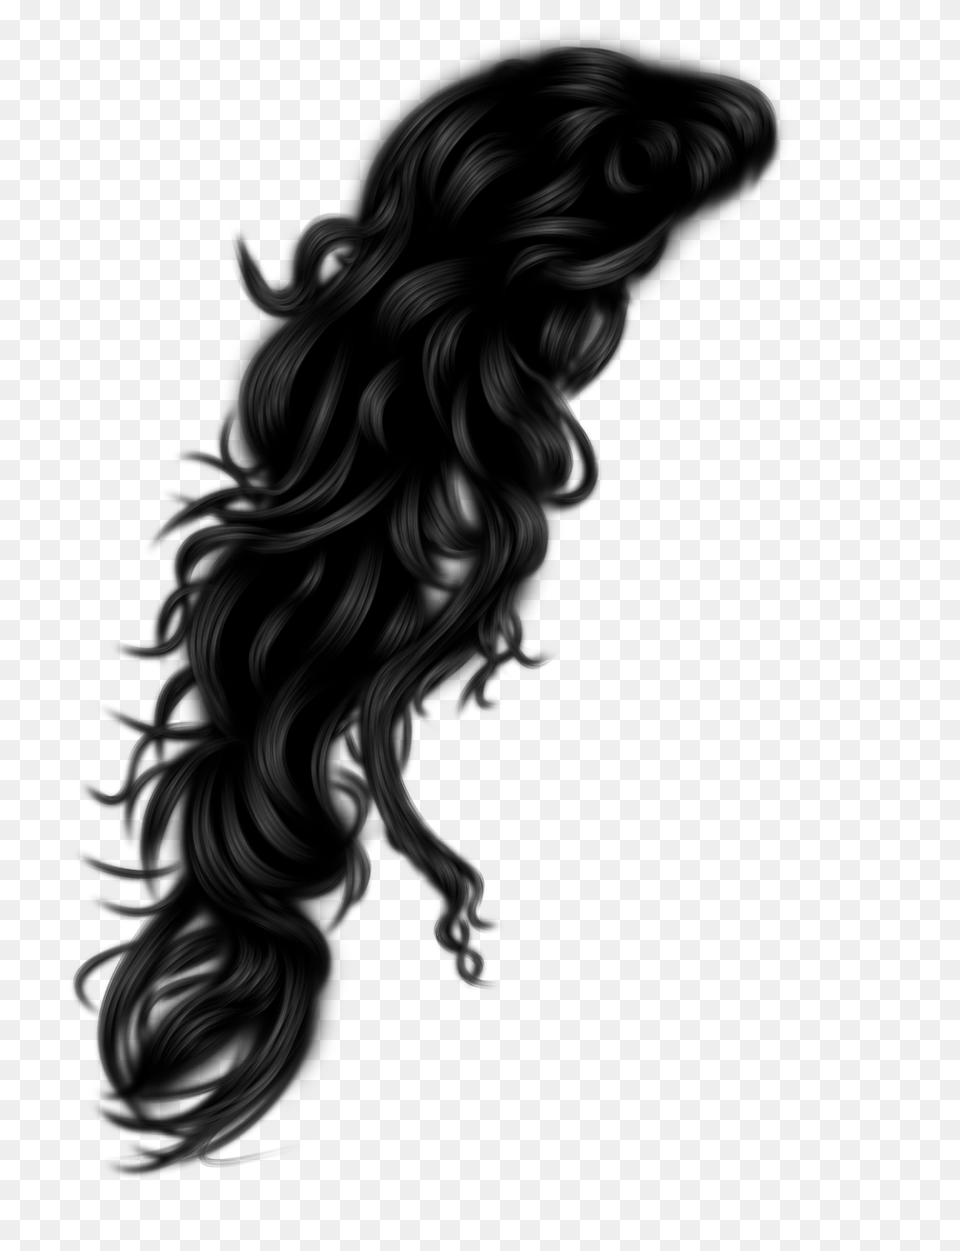 Hair Images Women And Men Hairs Images Download, Adult, Female, Person, Woman Png Image